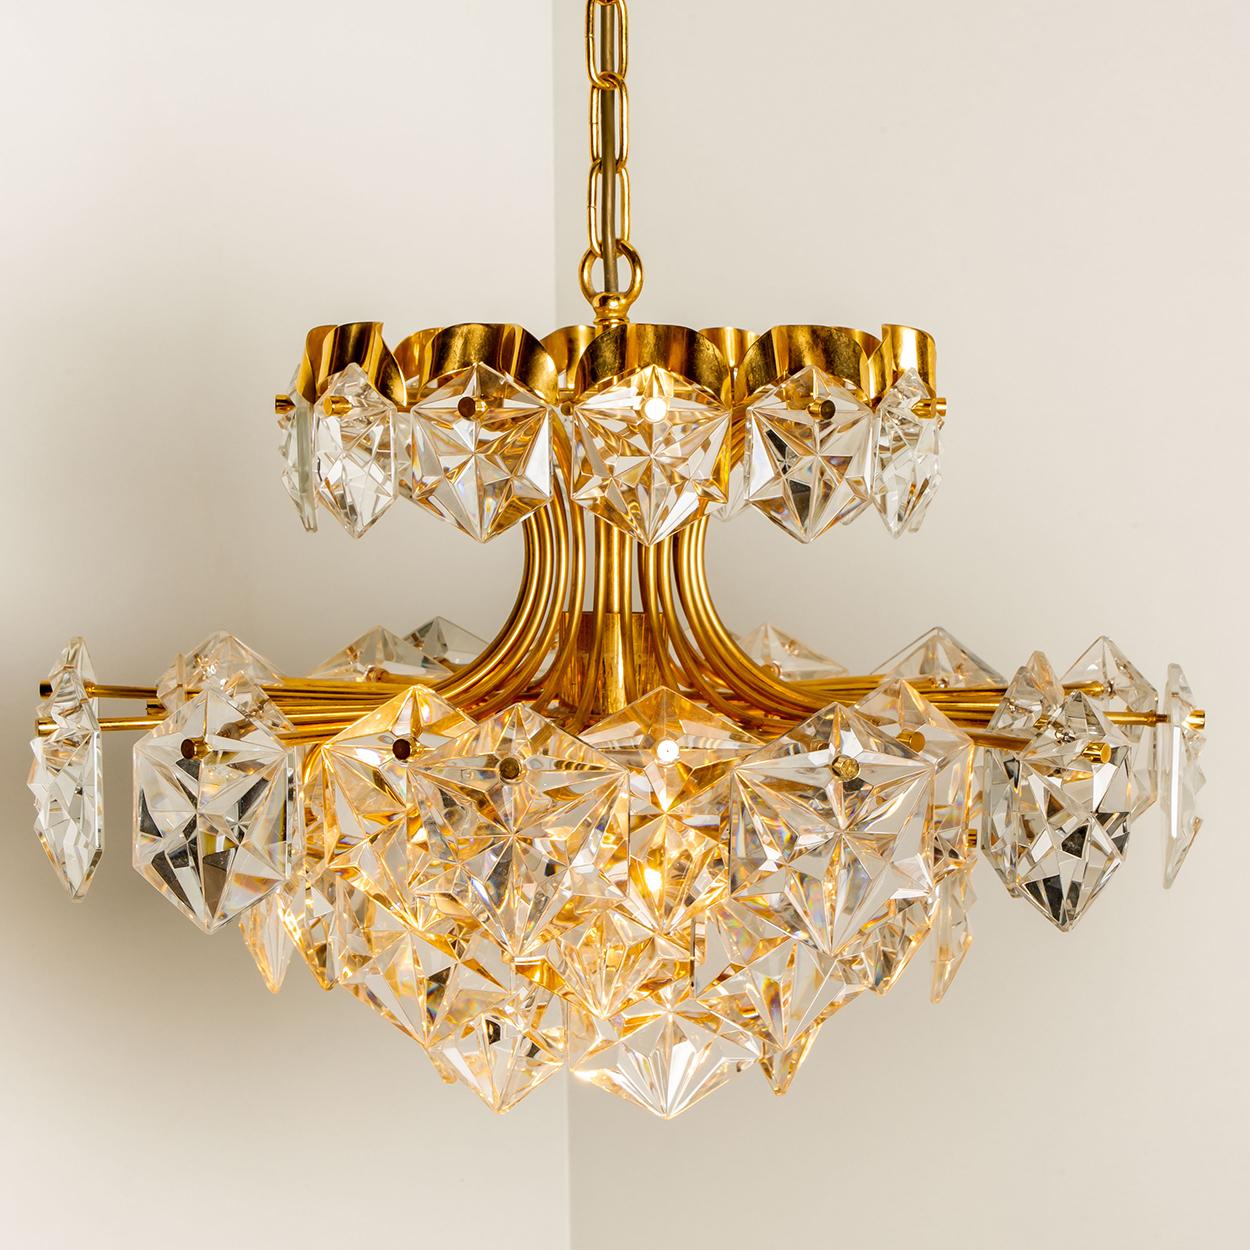 Pair of Two Layer Faceted Crystal Chandeliers Kinkeldey, 1970 For Sale 4